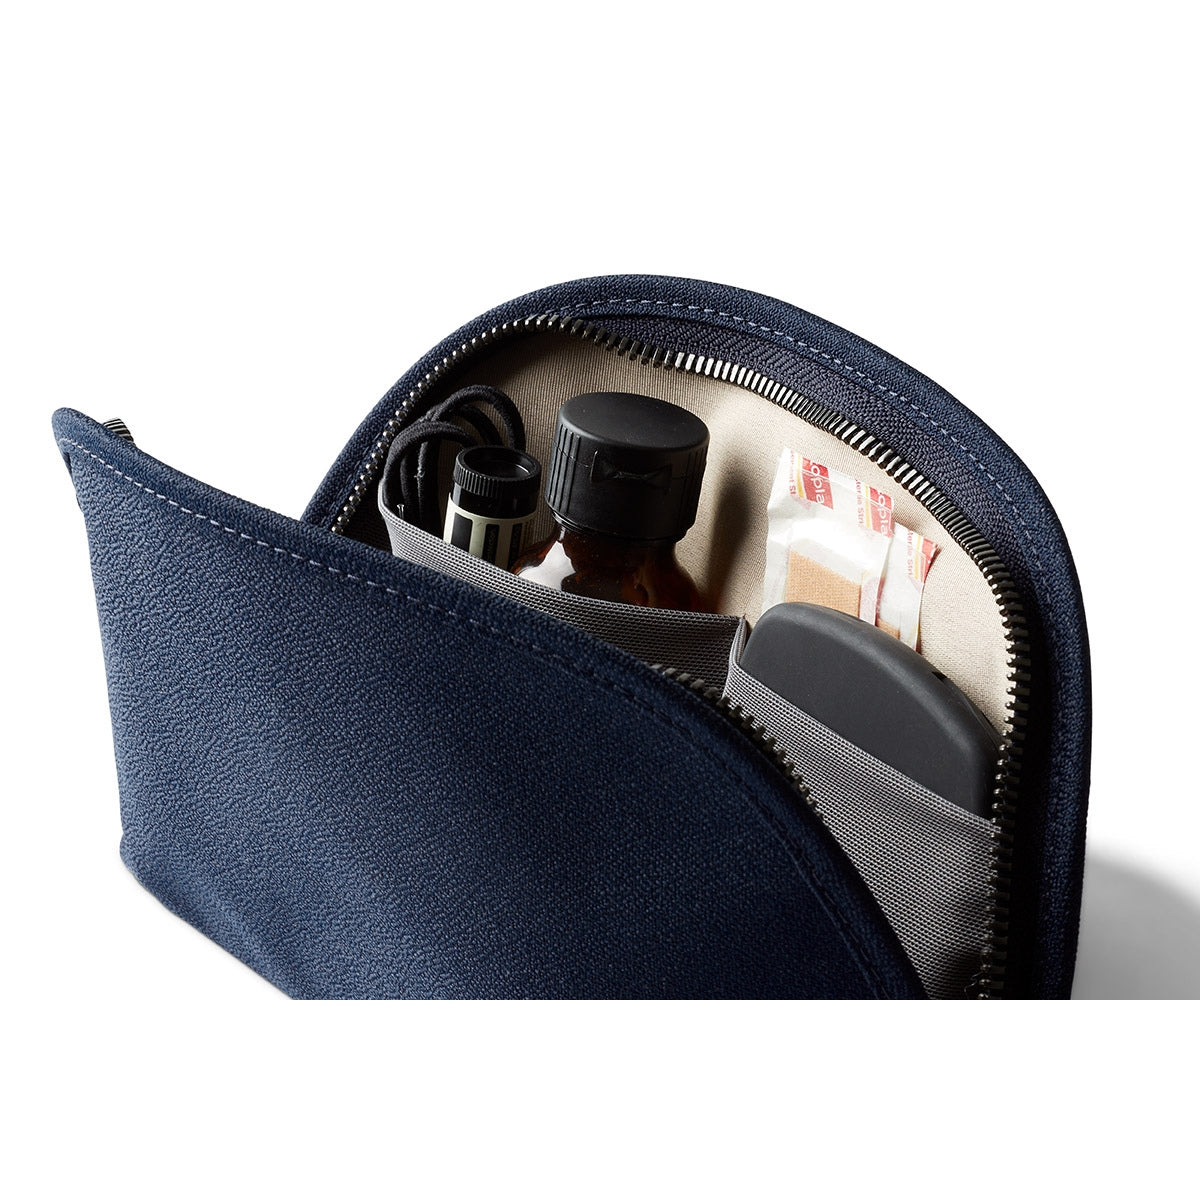 Bellroy Classic Pouch